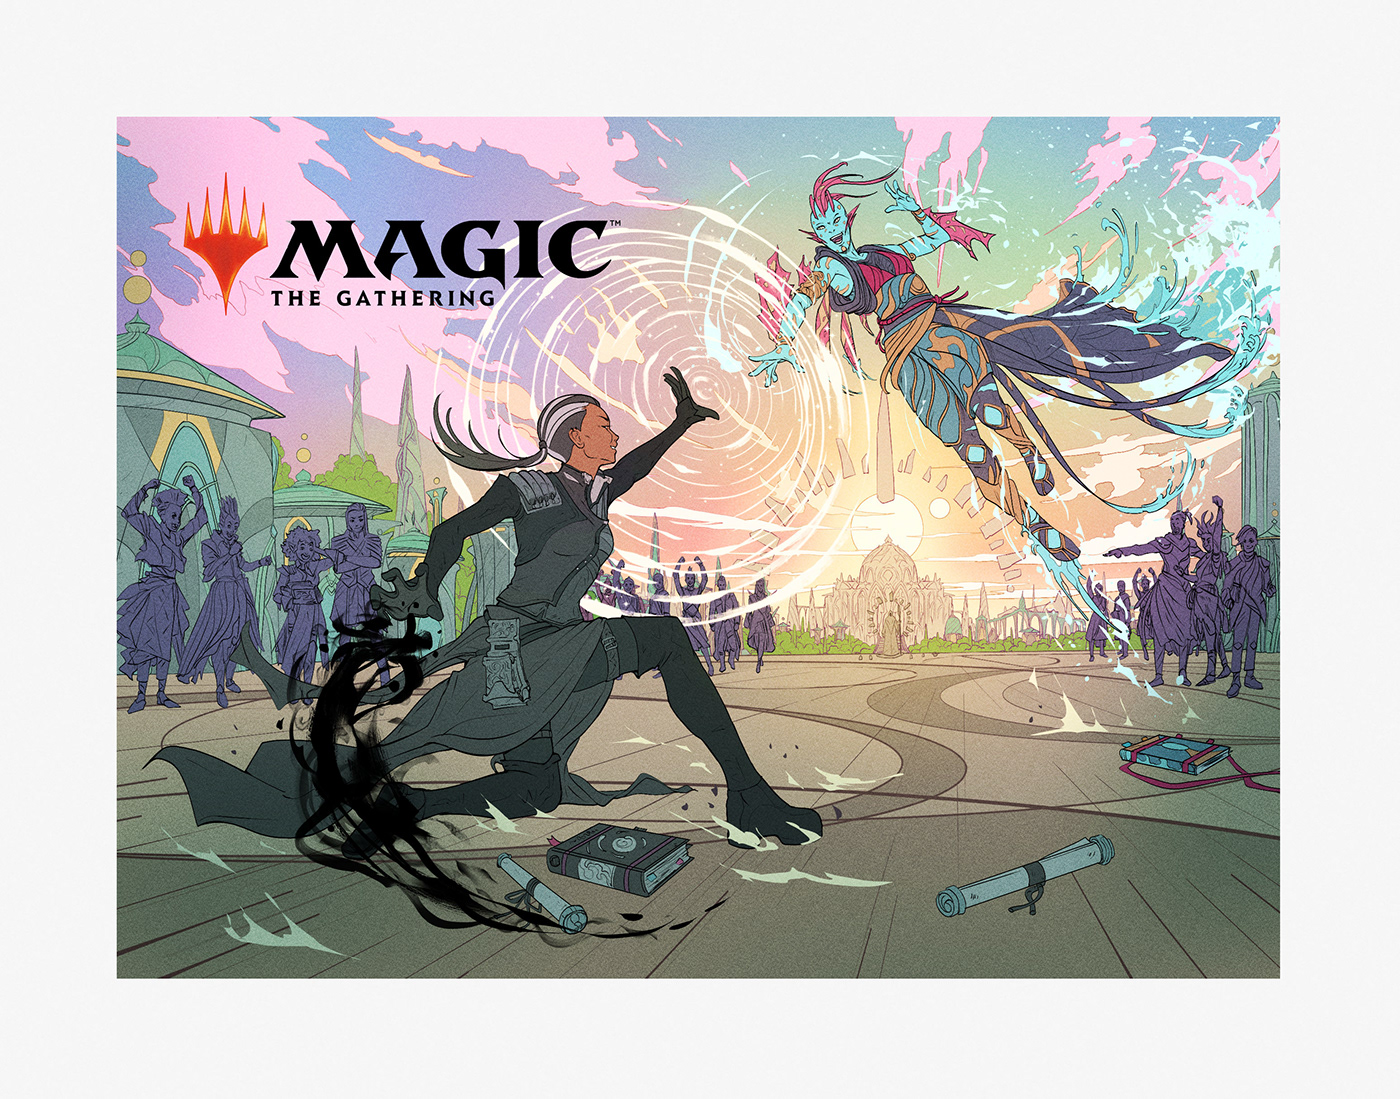 artwork Character cover Cover Art digital illustration fantasy Magic   magicthegathering poster Wizards of the Coast